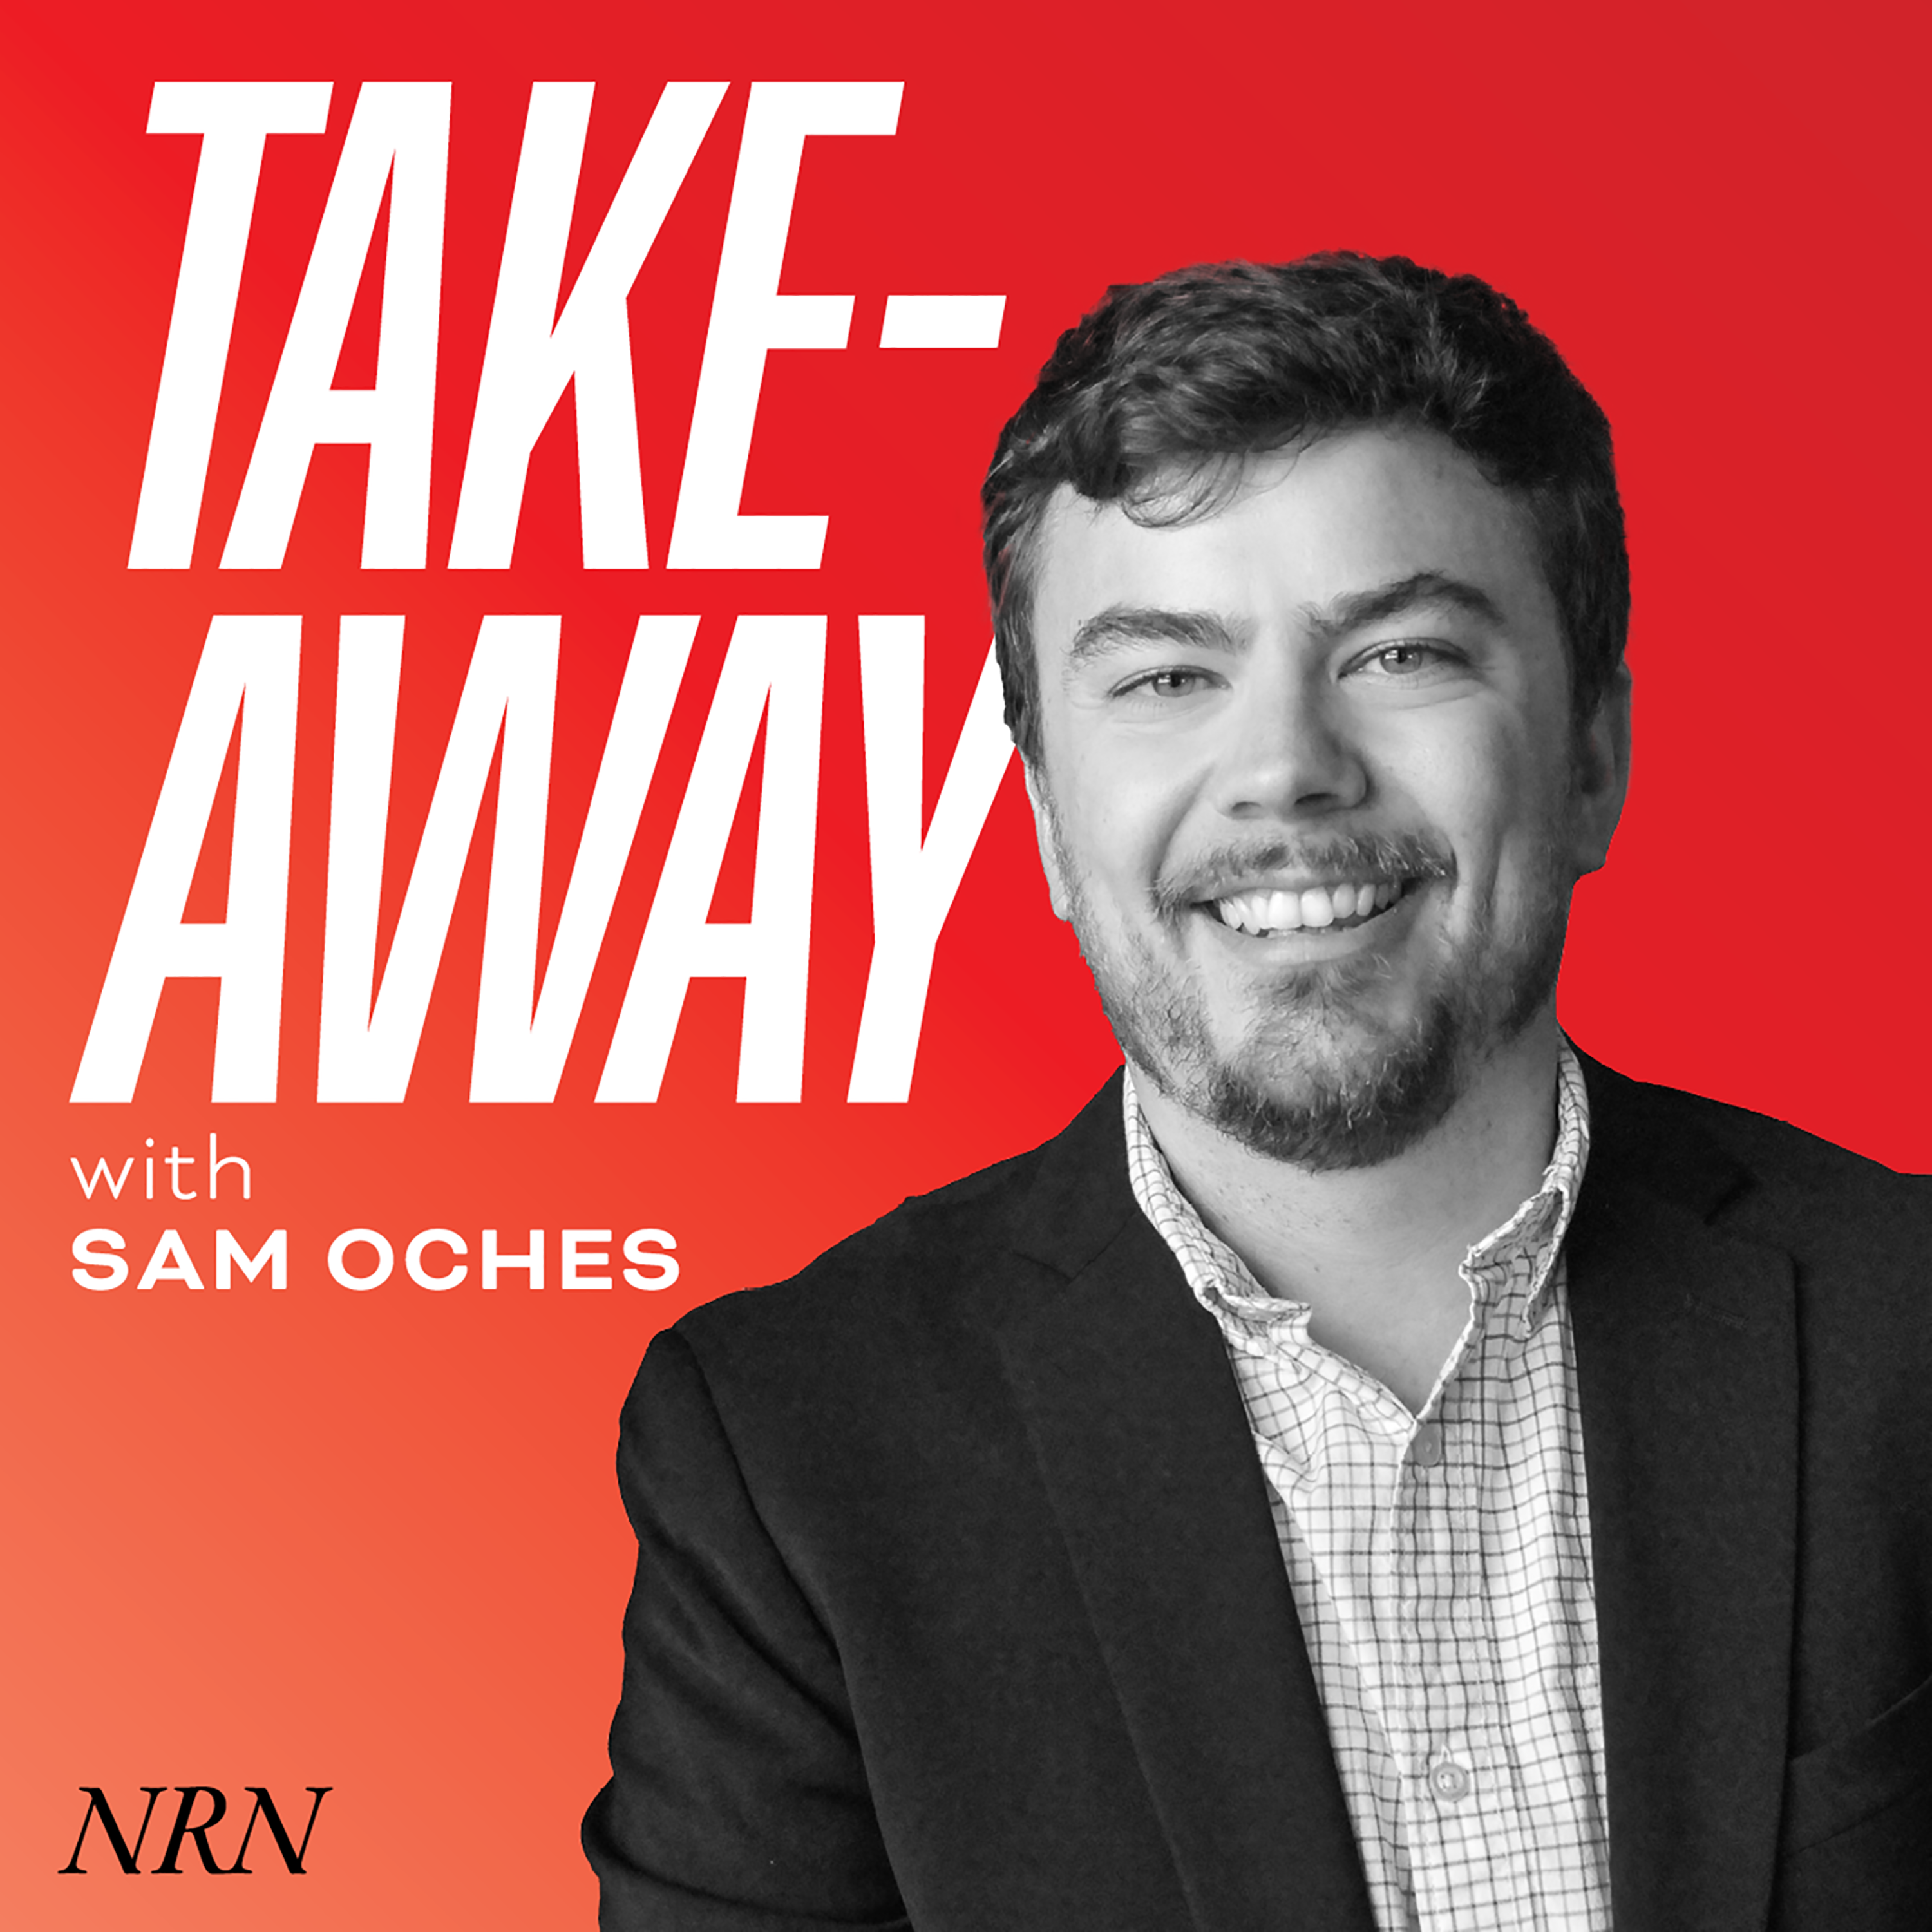 Artwork for podcast Take-Away with Sam Oches